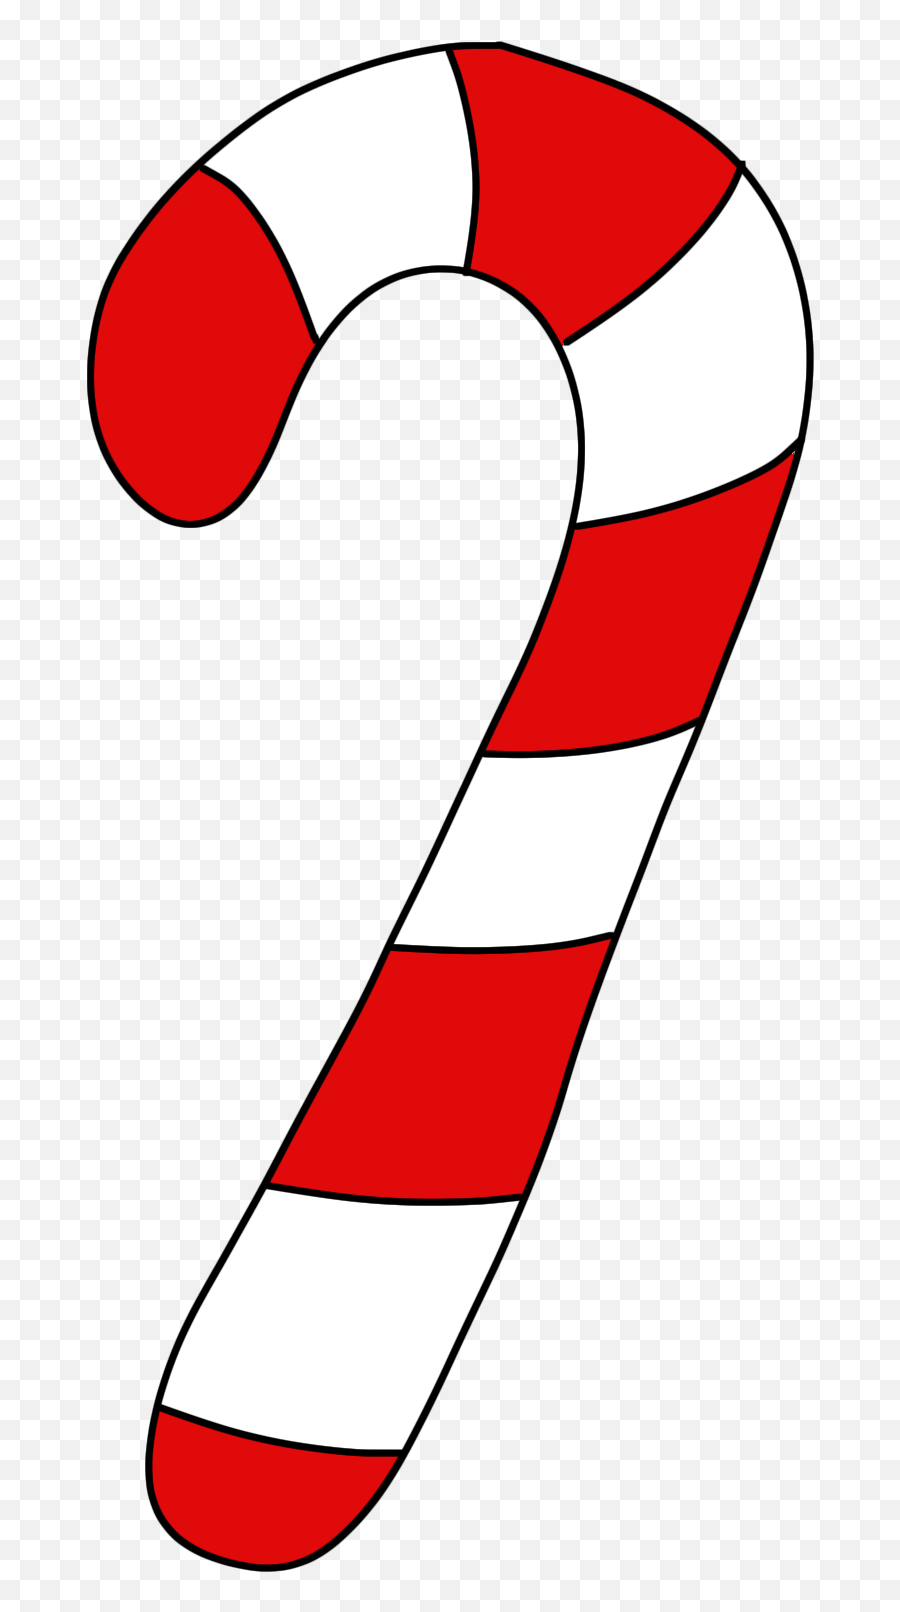 House Clipart Candy Cane House Candy - Clipart Transparent Candy Canes Emoji,Peppermint Emoji